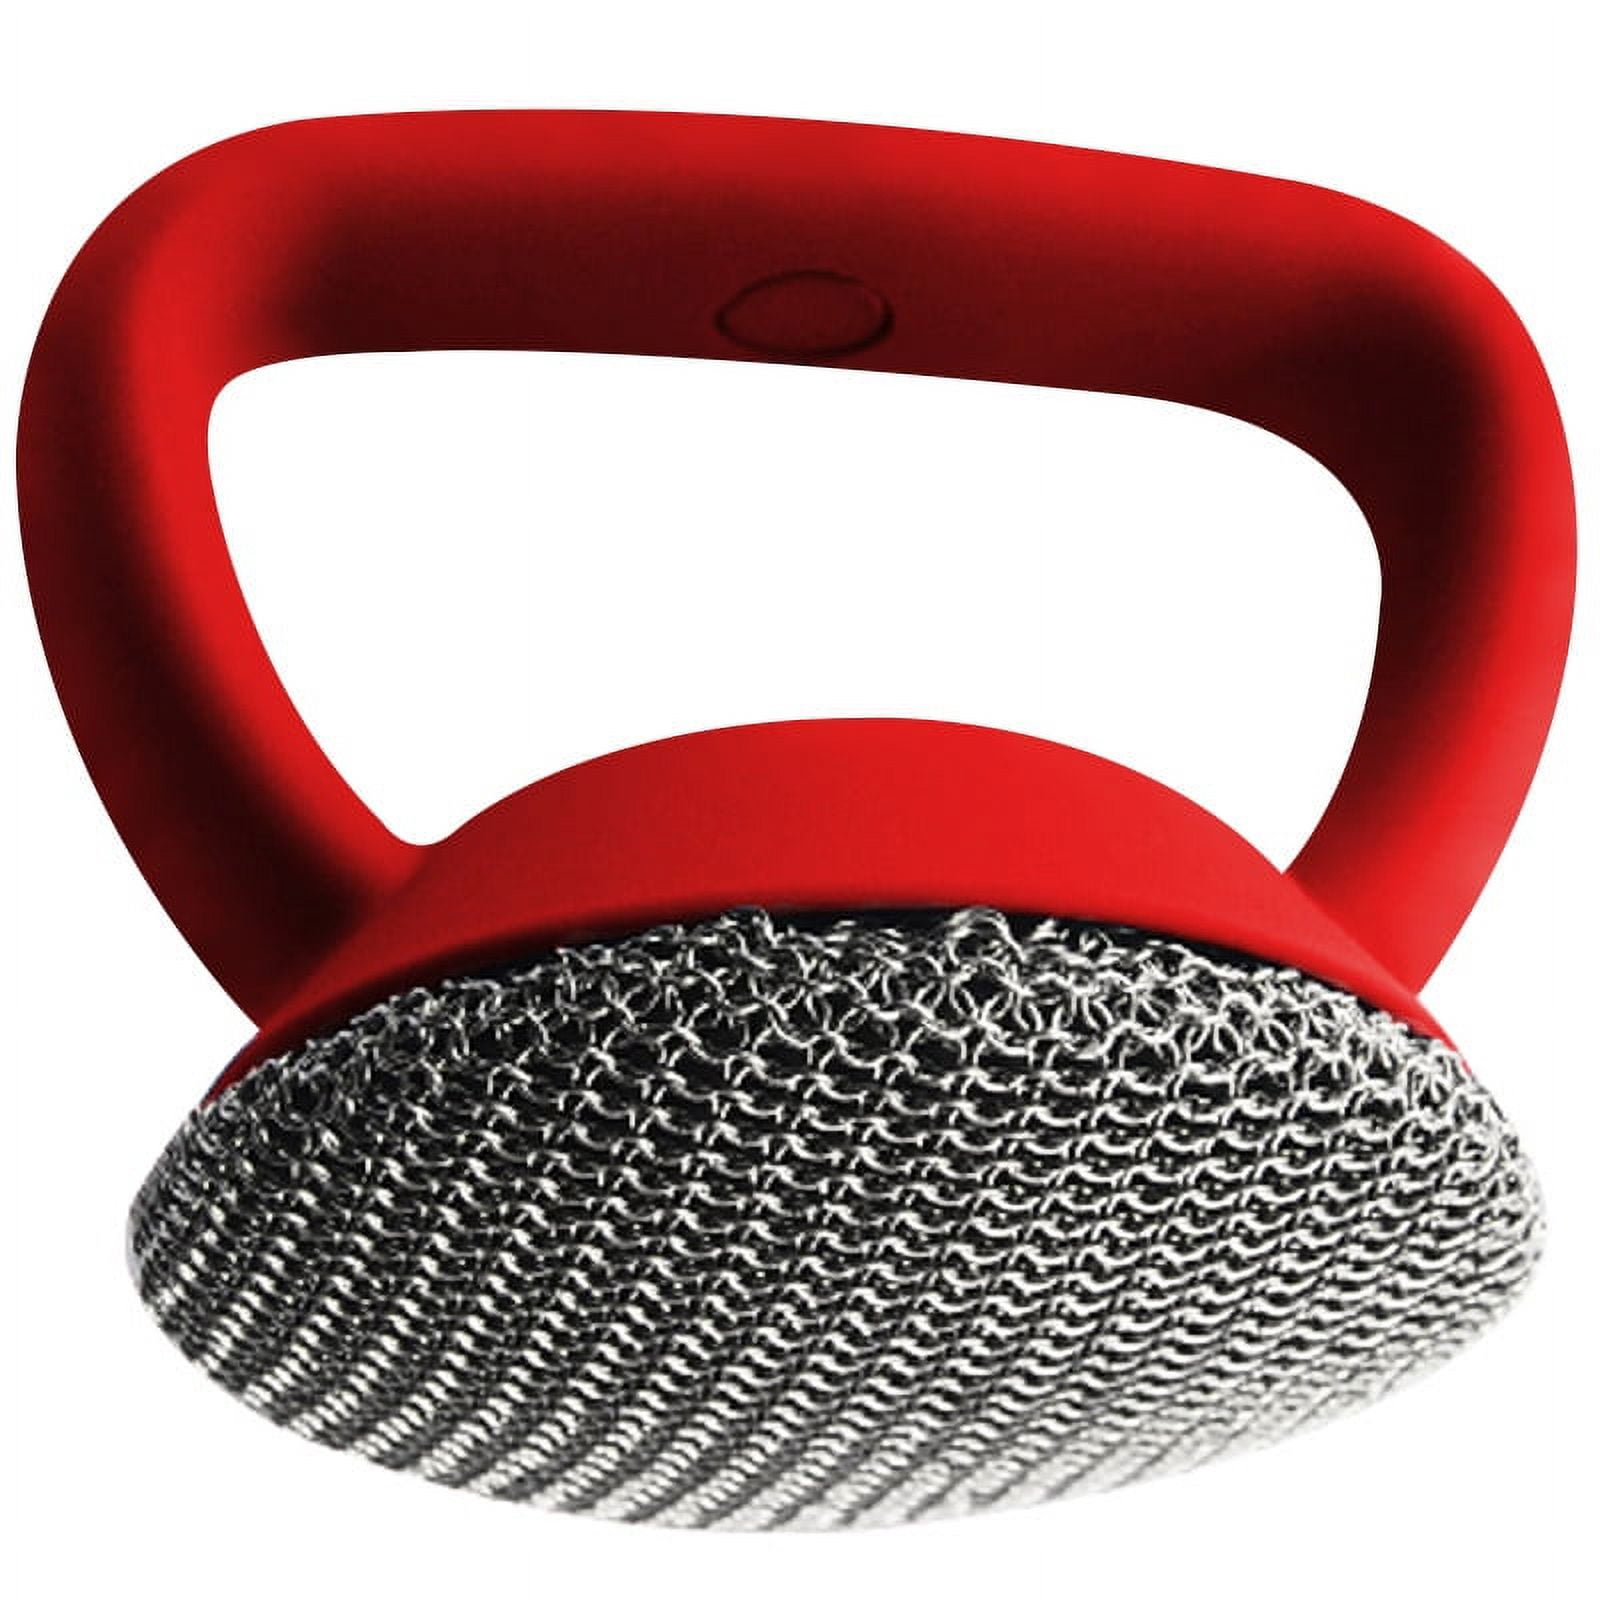 Cast Iron Brush Scrubber Cast Iron Cleaner Chainmail Scrubber with Handle +  Pan Scraper Tool - 316 Chain Maille Brush to Clean Pan Pot Skillet Grill